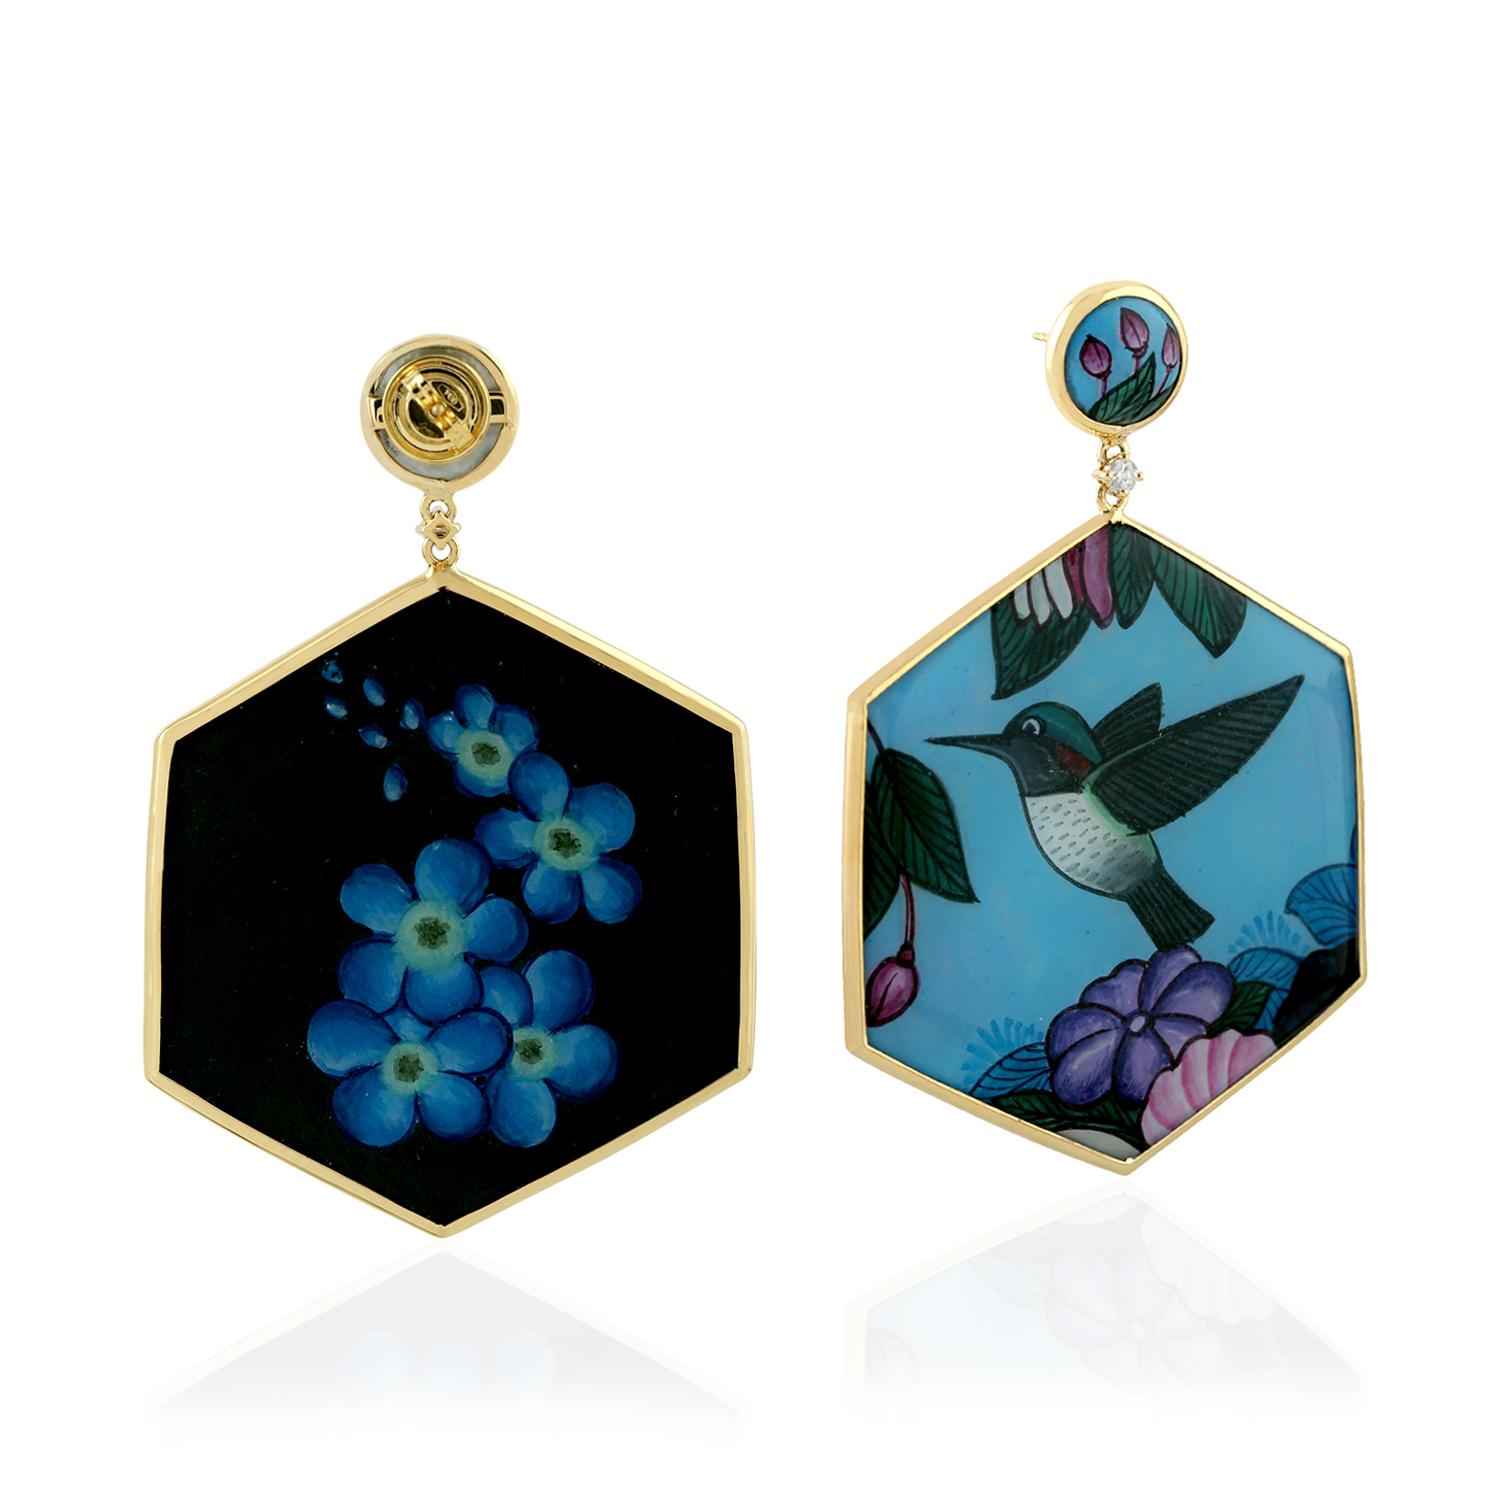 Sweet this hexagon shape Hand Painted Bird Bakelite Earring in 18k Yellow Gold is perfect for Mother's Day gift or any occasion.

18KT Gold: 6.190gms
Diamond: 0.15cts
MOP: 76.15cts
Enamel: 8.28gms
